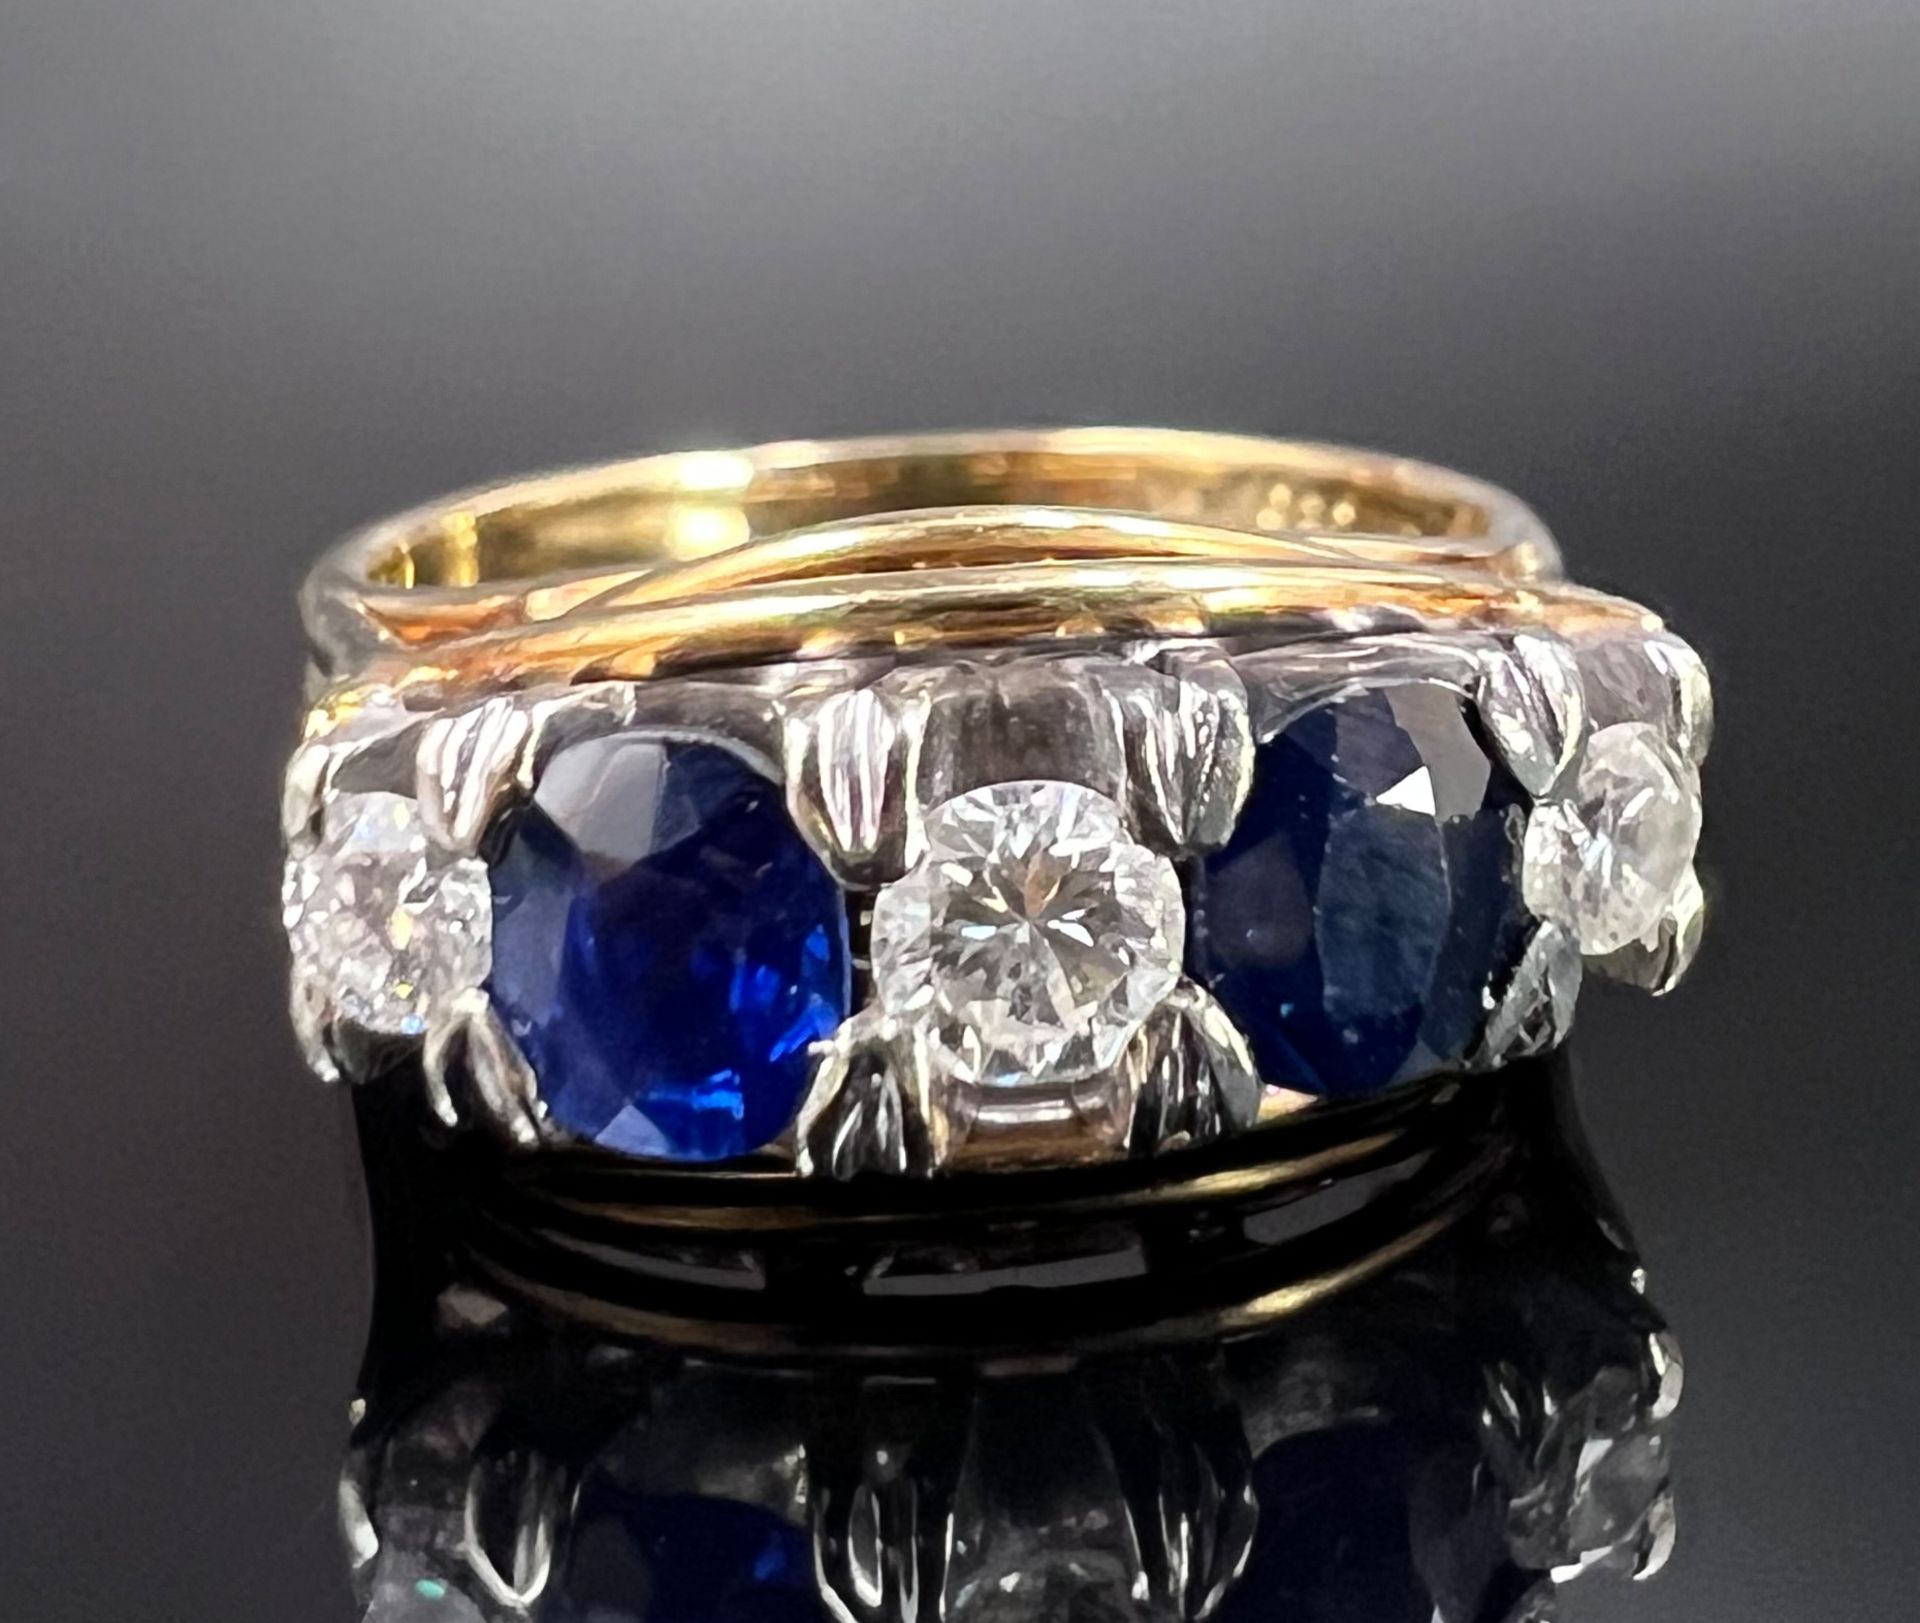 Ladies' ring. 585 yellow gold and white gold with 3 diamonds and 2 sapphires.